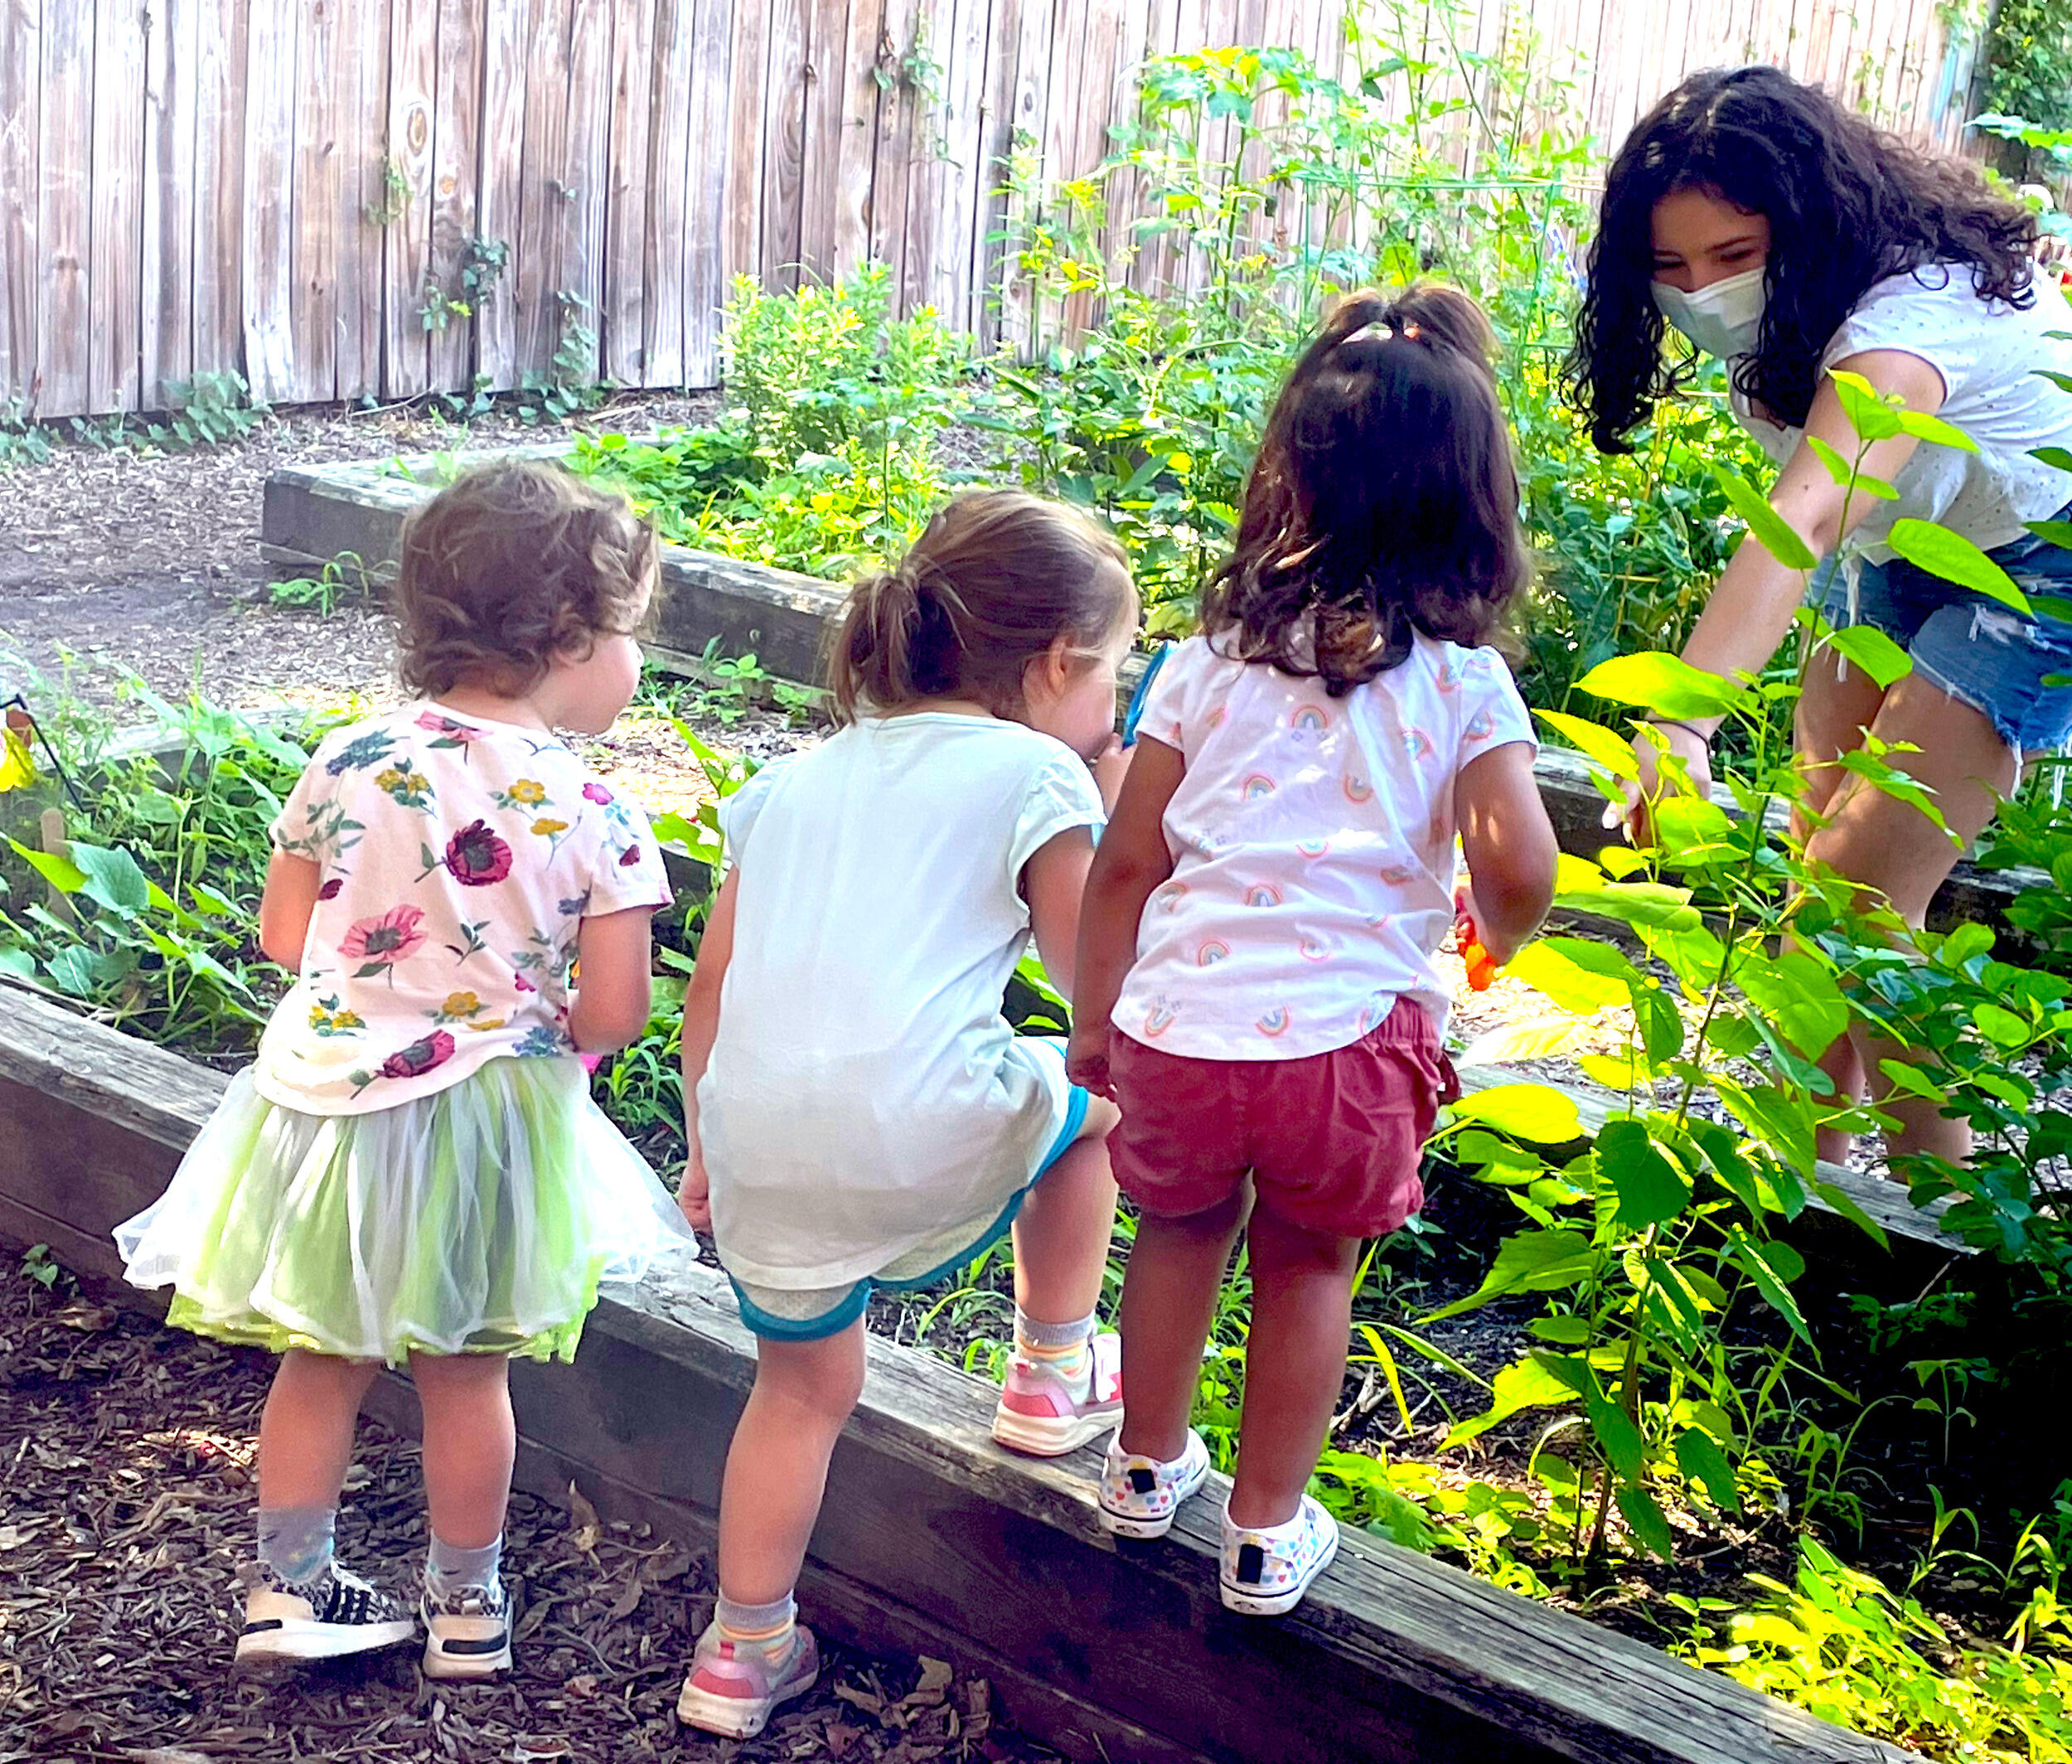 Children standing on a garden box in front of a woman wearing a face mask 